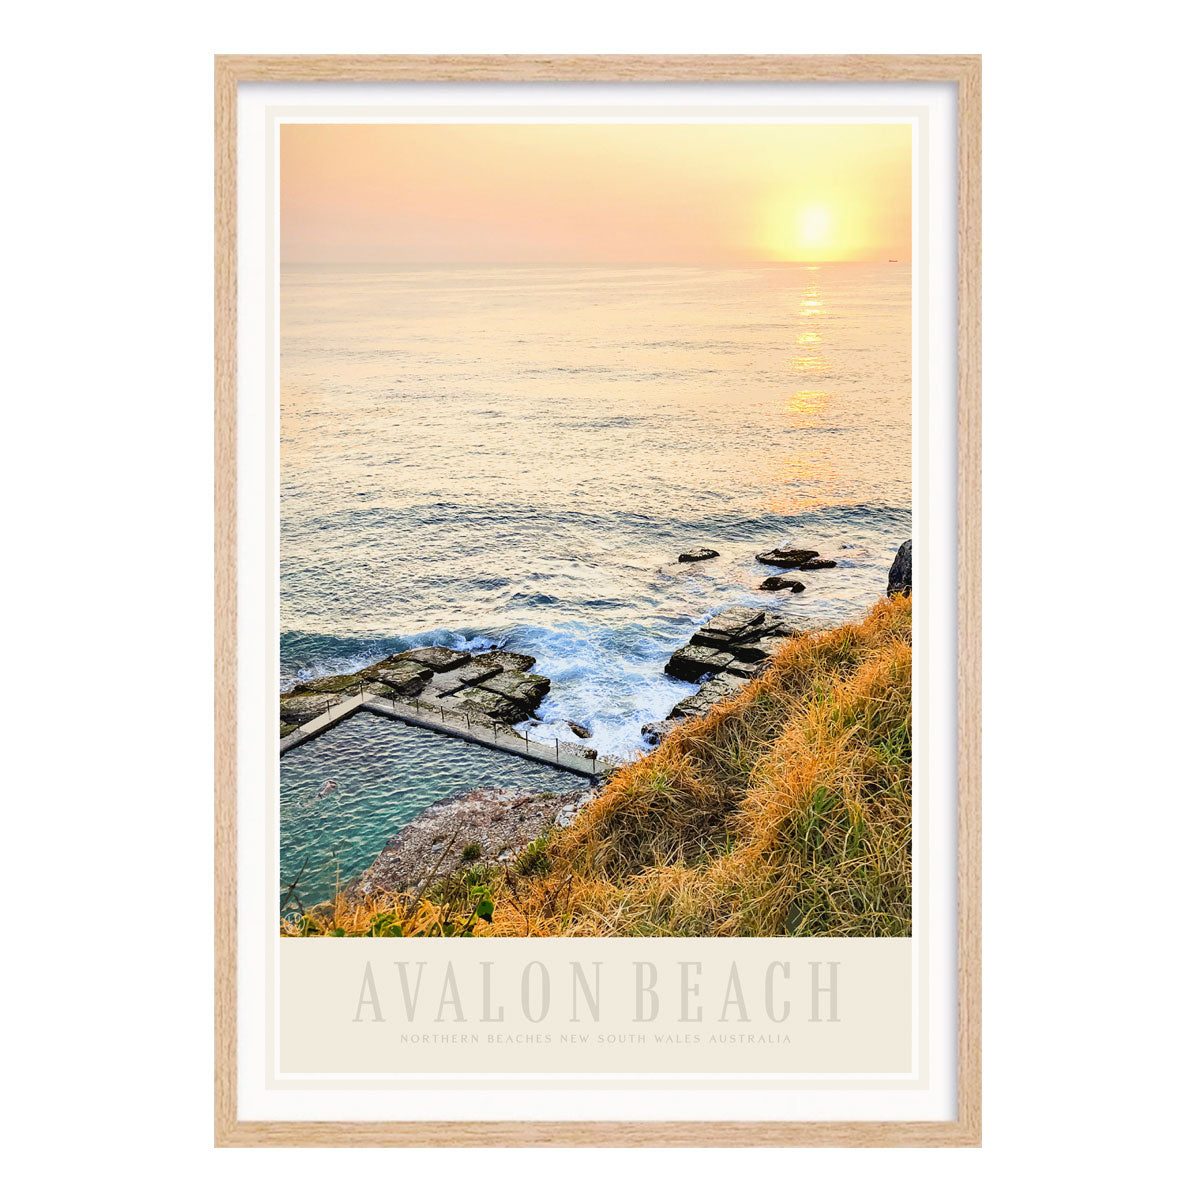 Avalon Beach vintage retro travel poster print in oak frame by Places We Luv